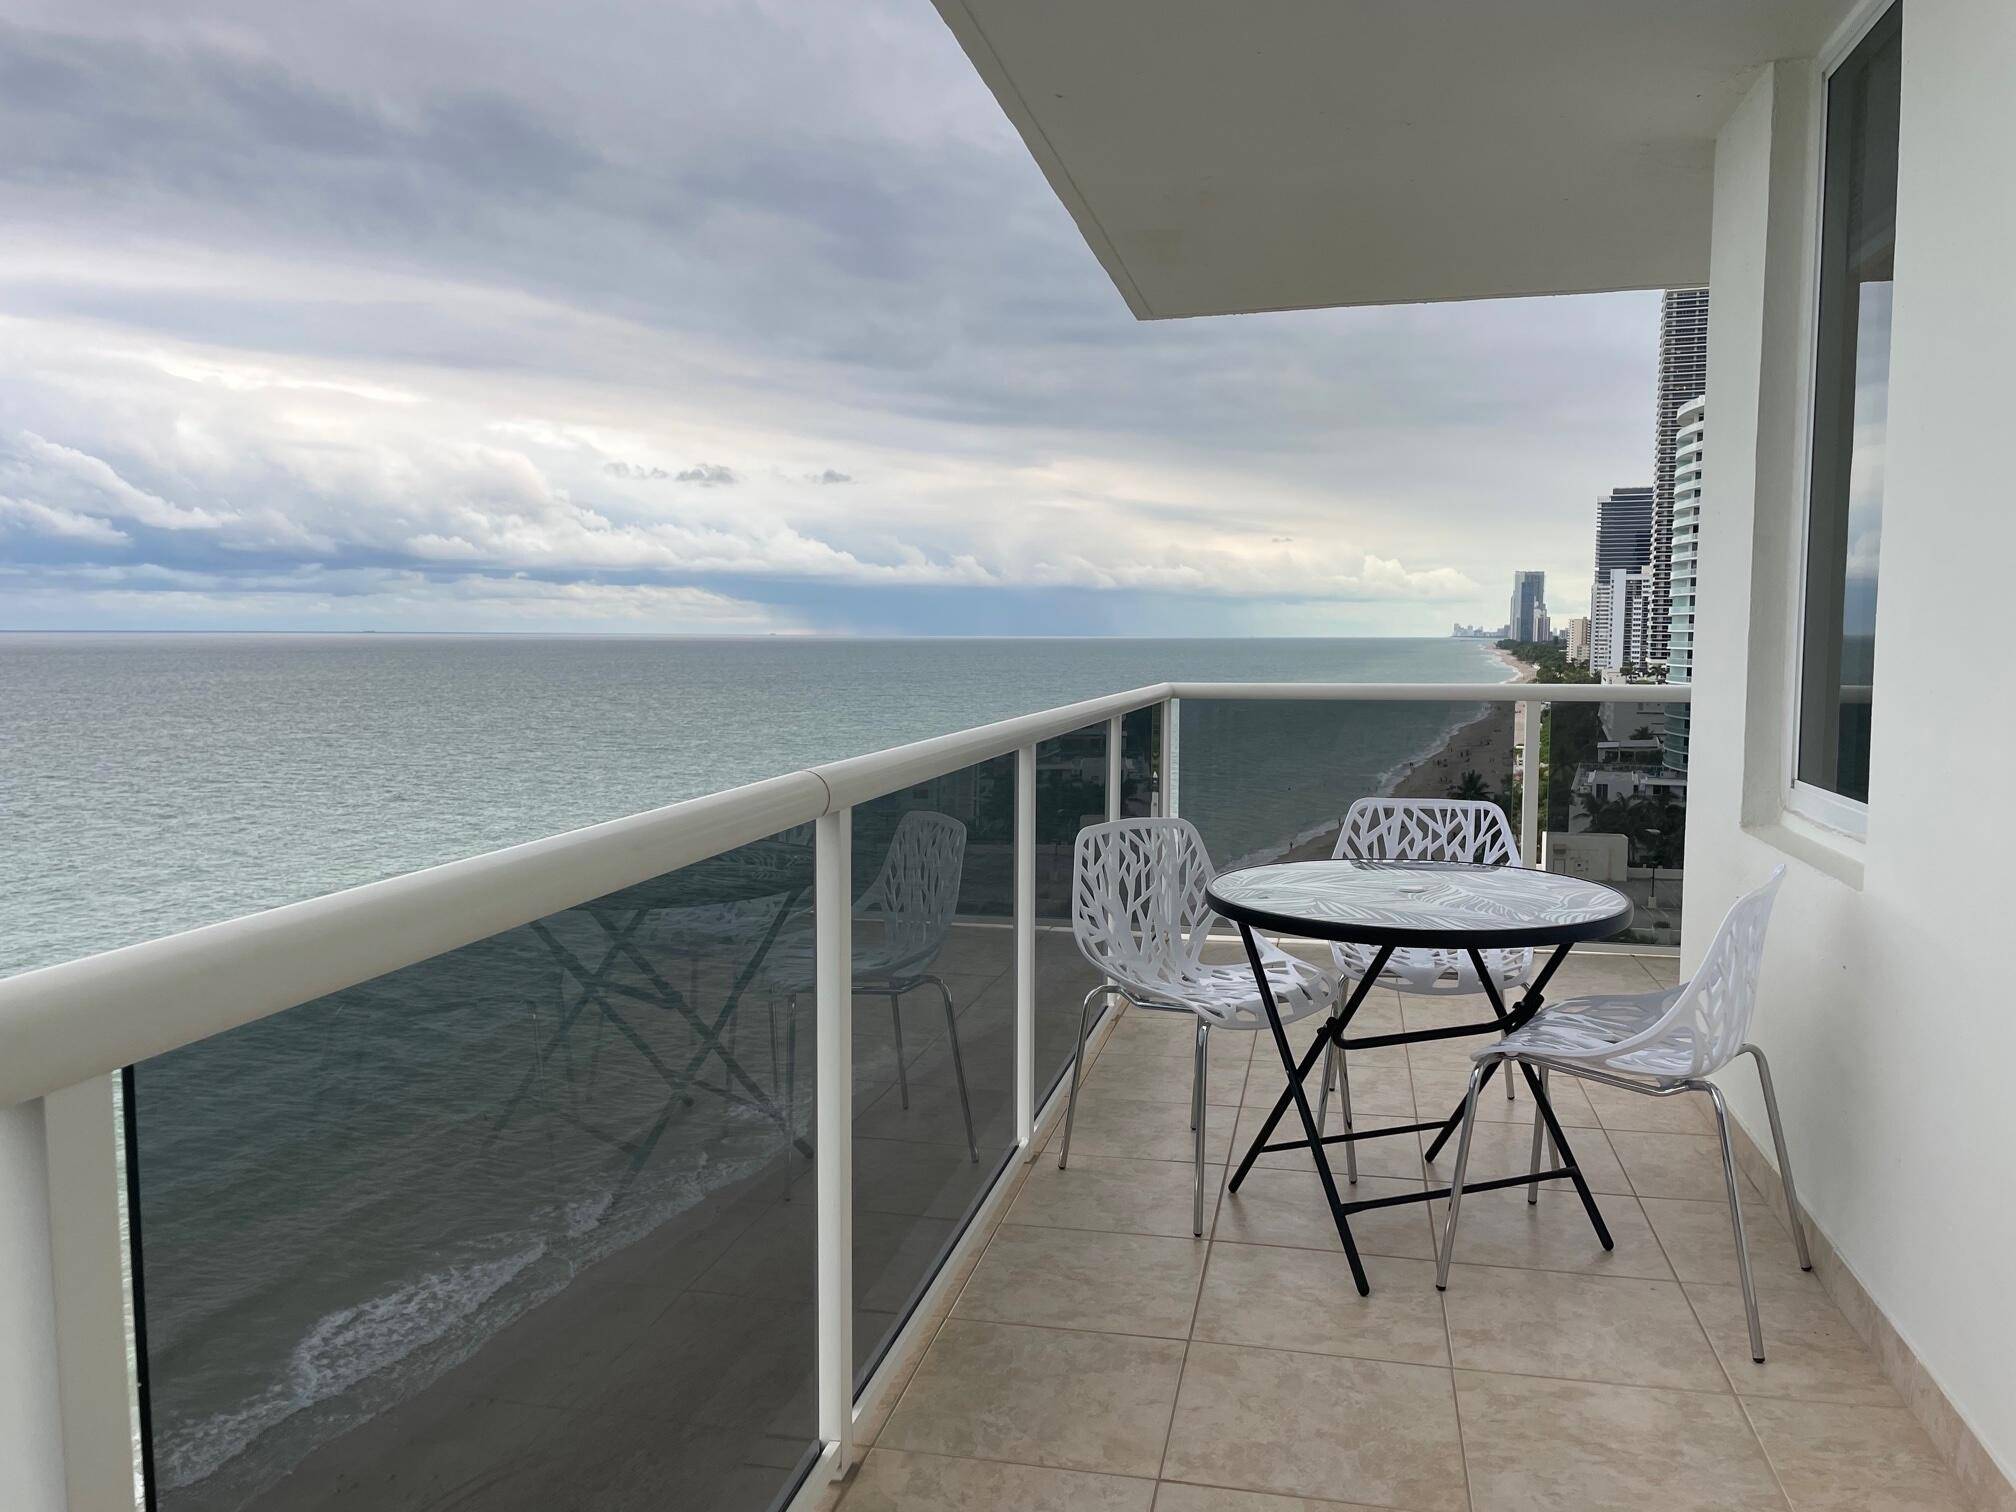 Gorgeous 2 bedroom 2 bath apartment fully furnished located in a prime oceanfront location.